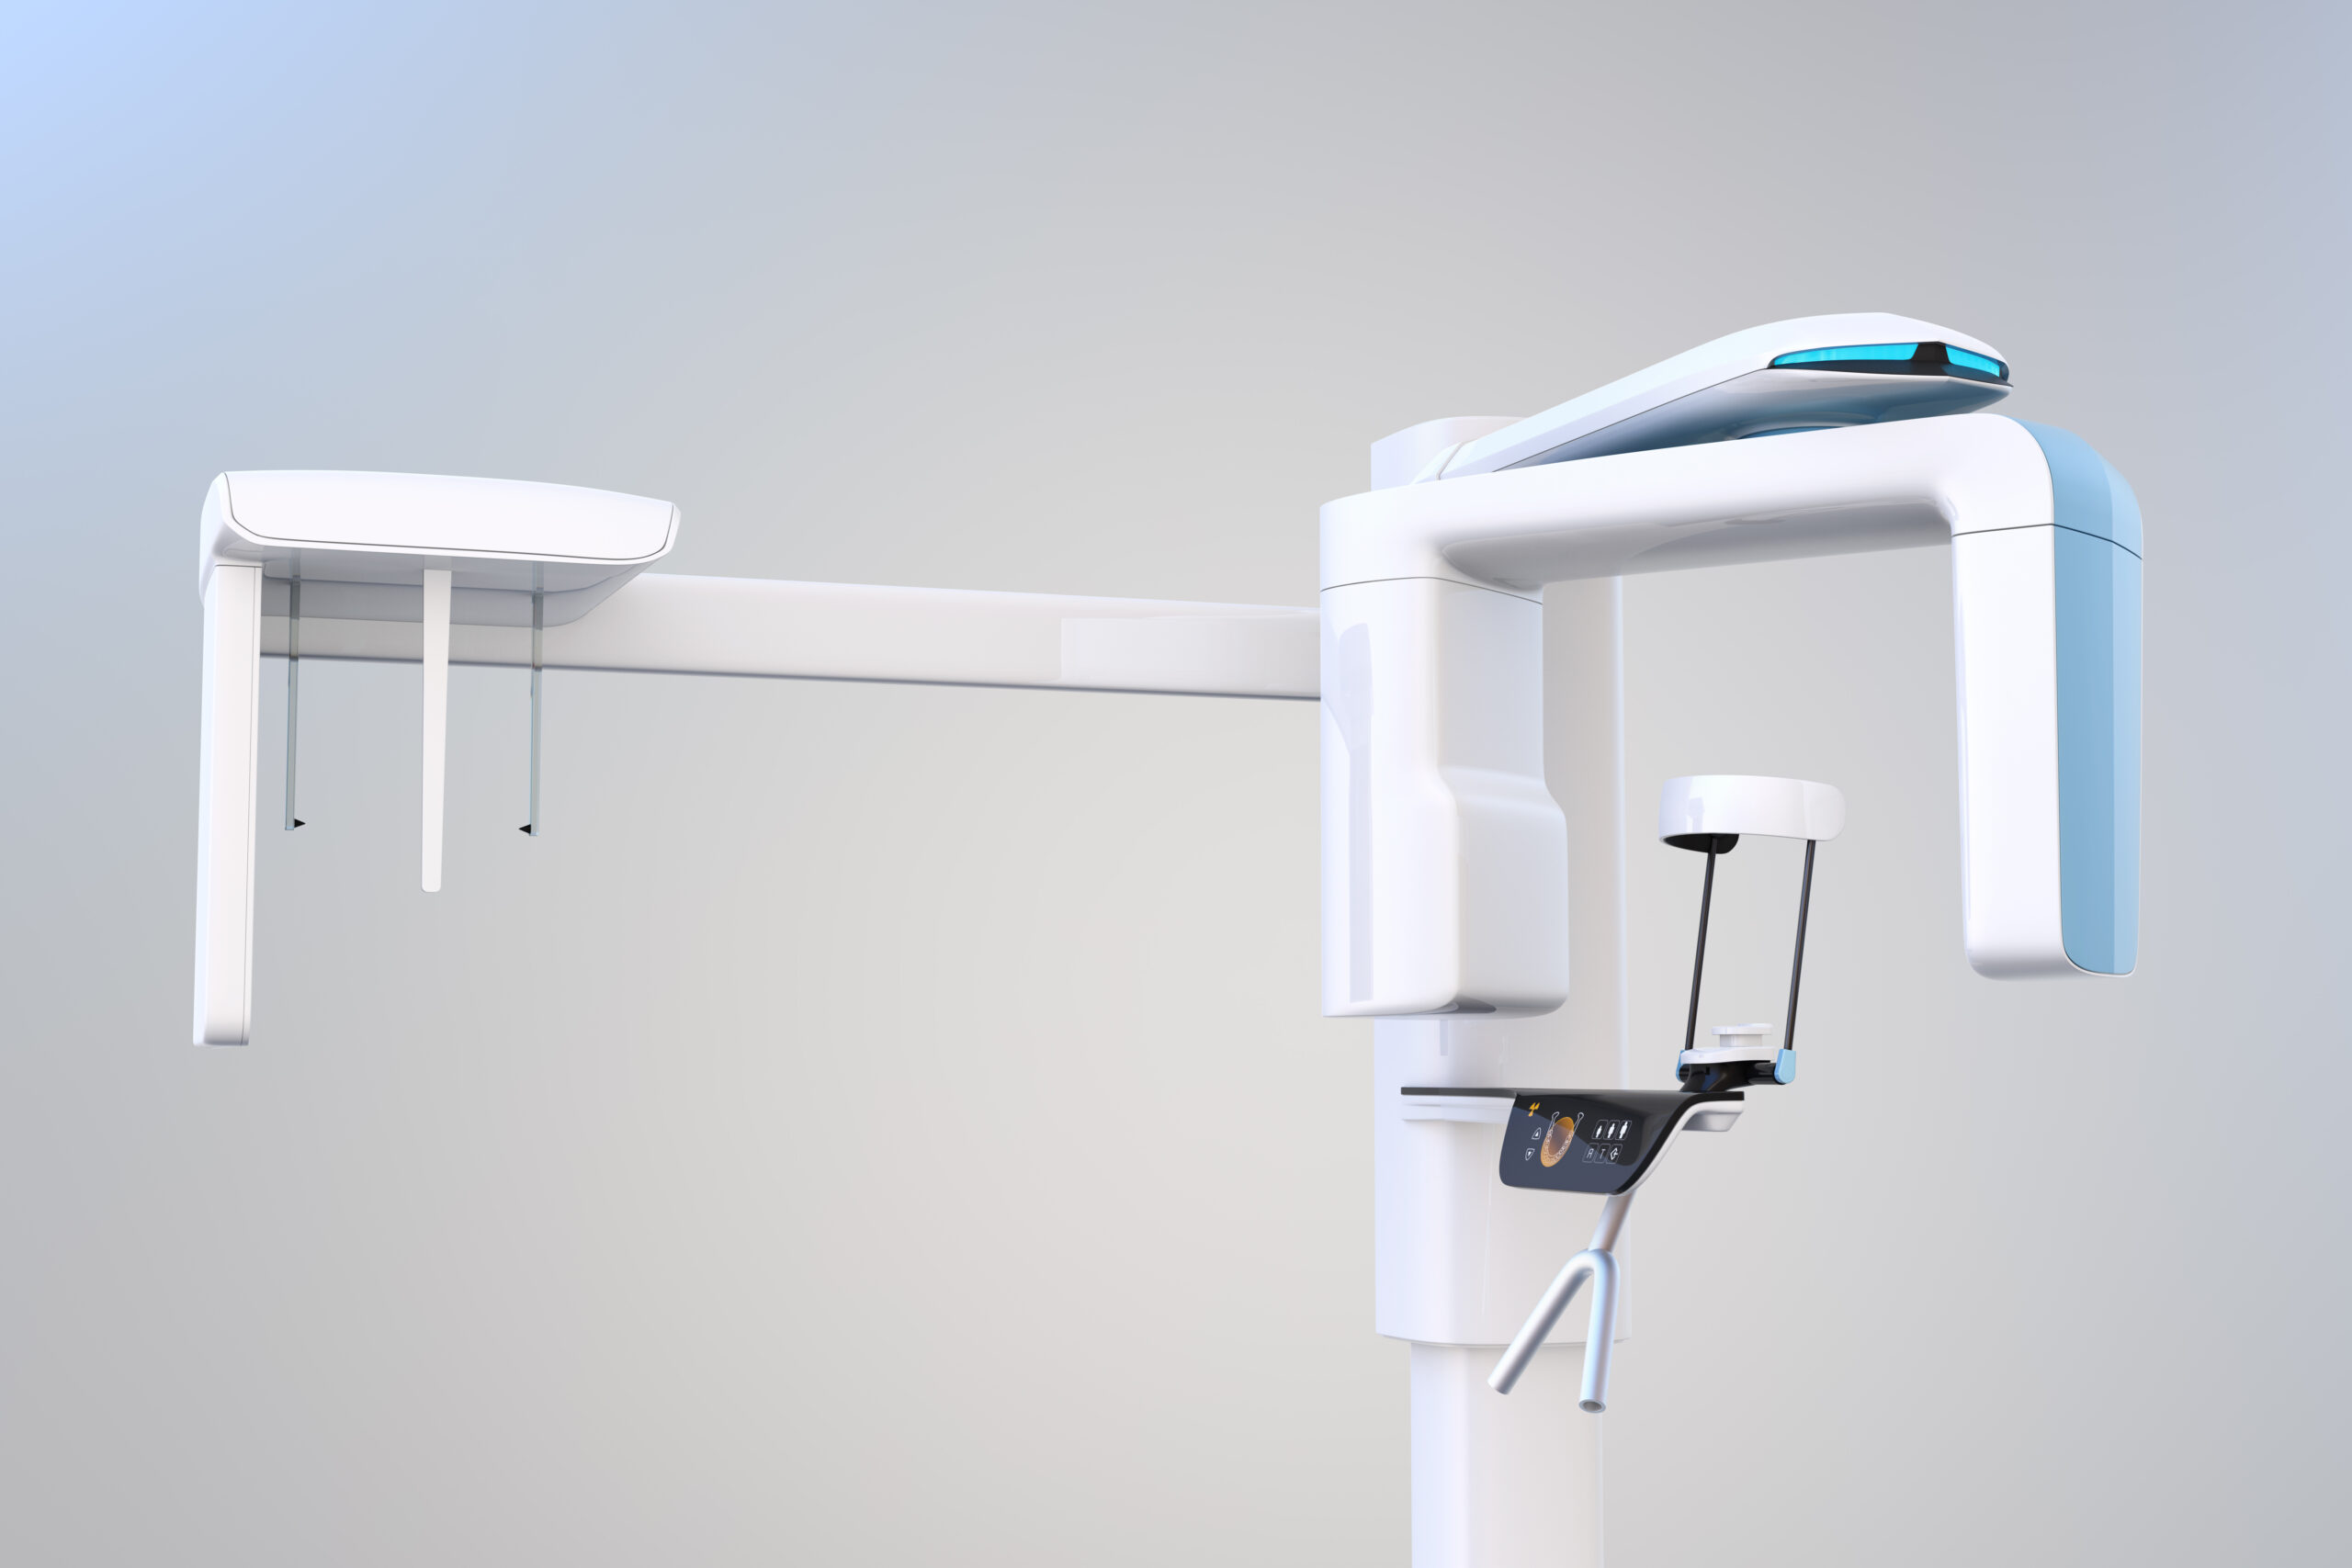 The Benefits of Cone Beam CT Imaging Technology